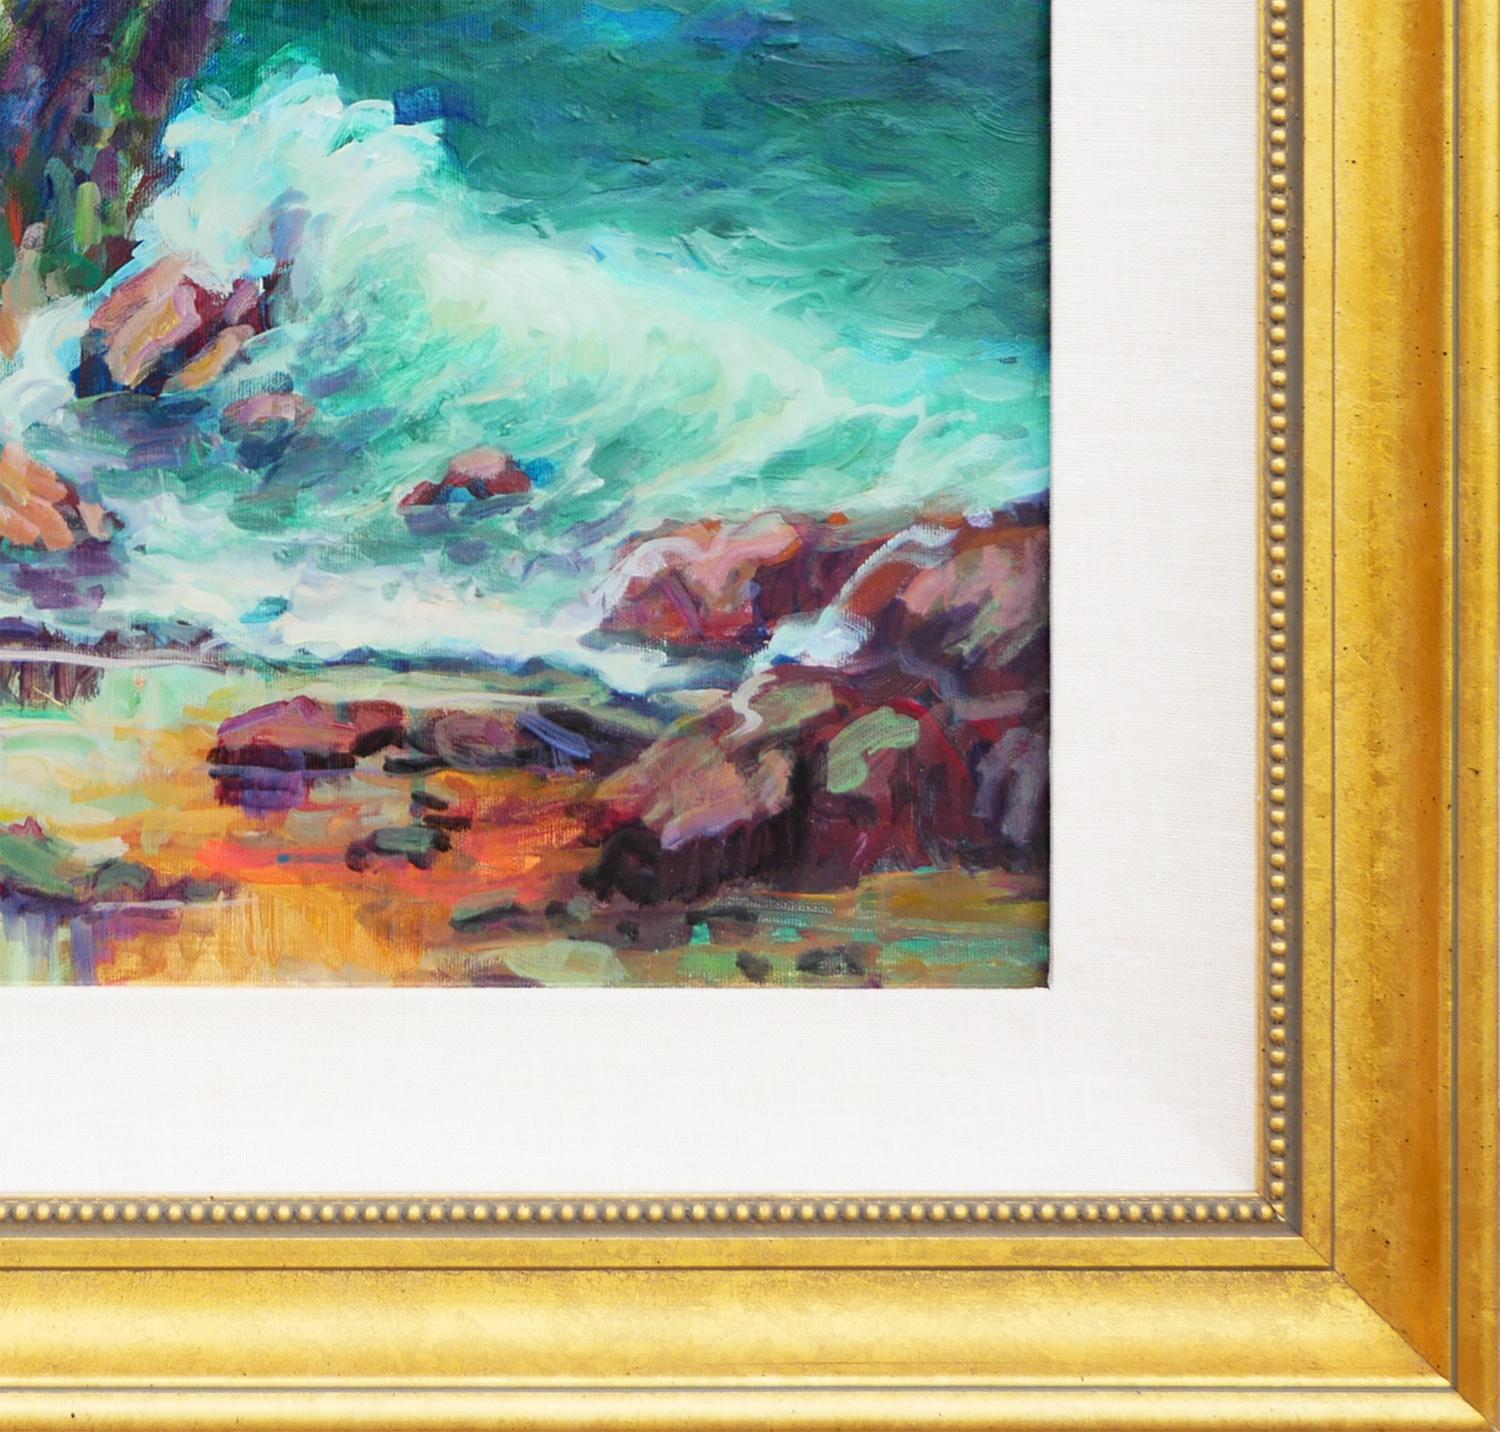 Pink, Teal, Blue, and Green Impressionist Crystal Cove at Laguna Beach Painting For Sale 1